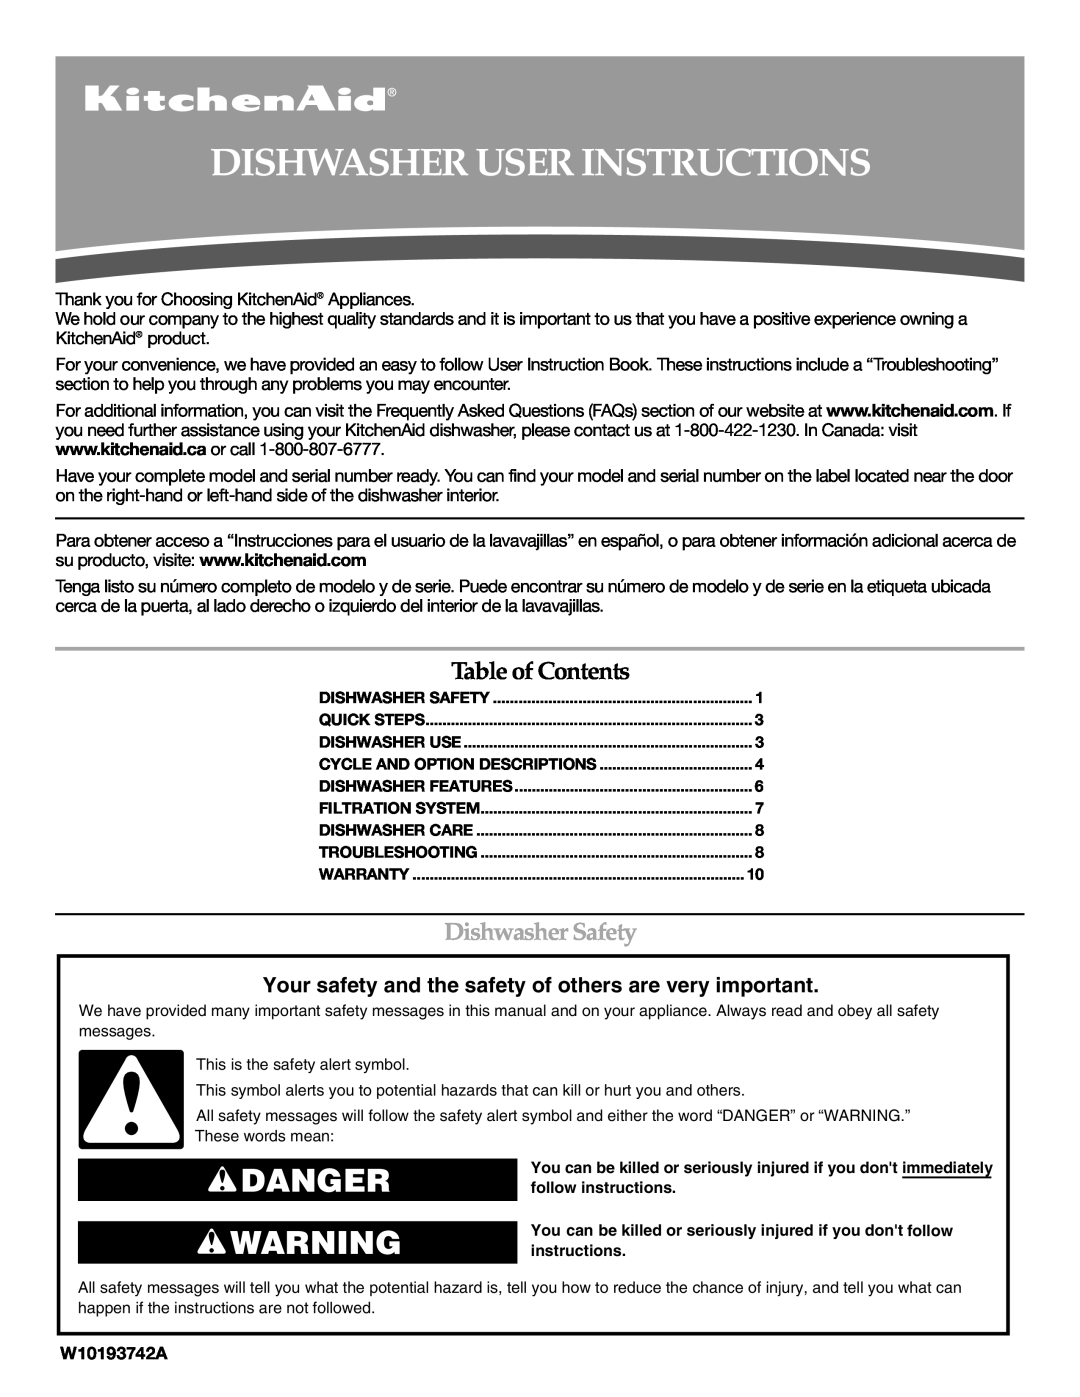 KitchenAid KUDE03FTSS warranty Dishwasher User Instructions, Danger, Table of Contents, Dishwasher Safety, W10193742A 